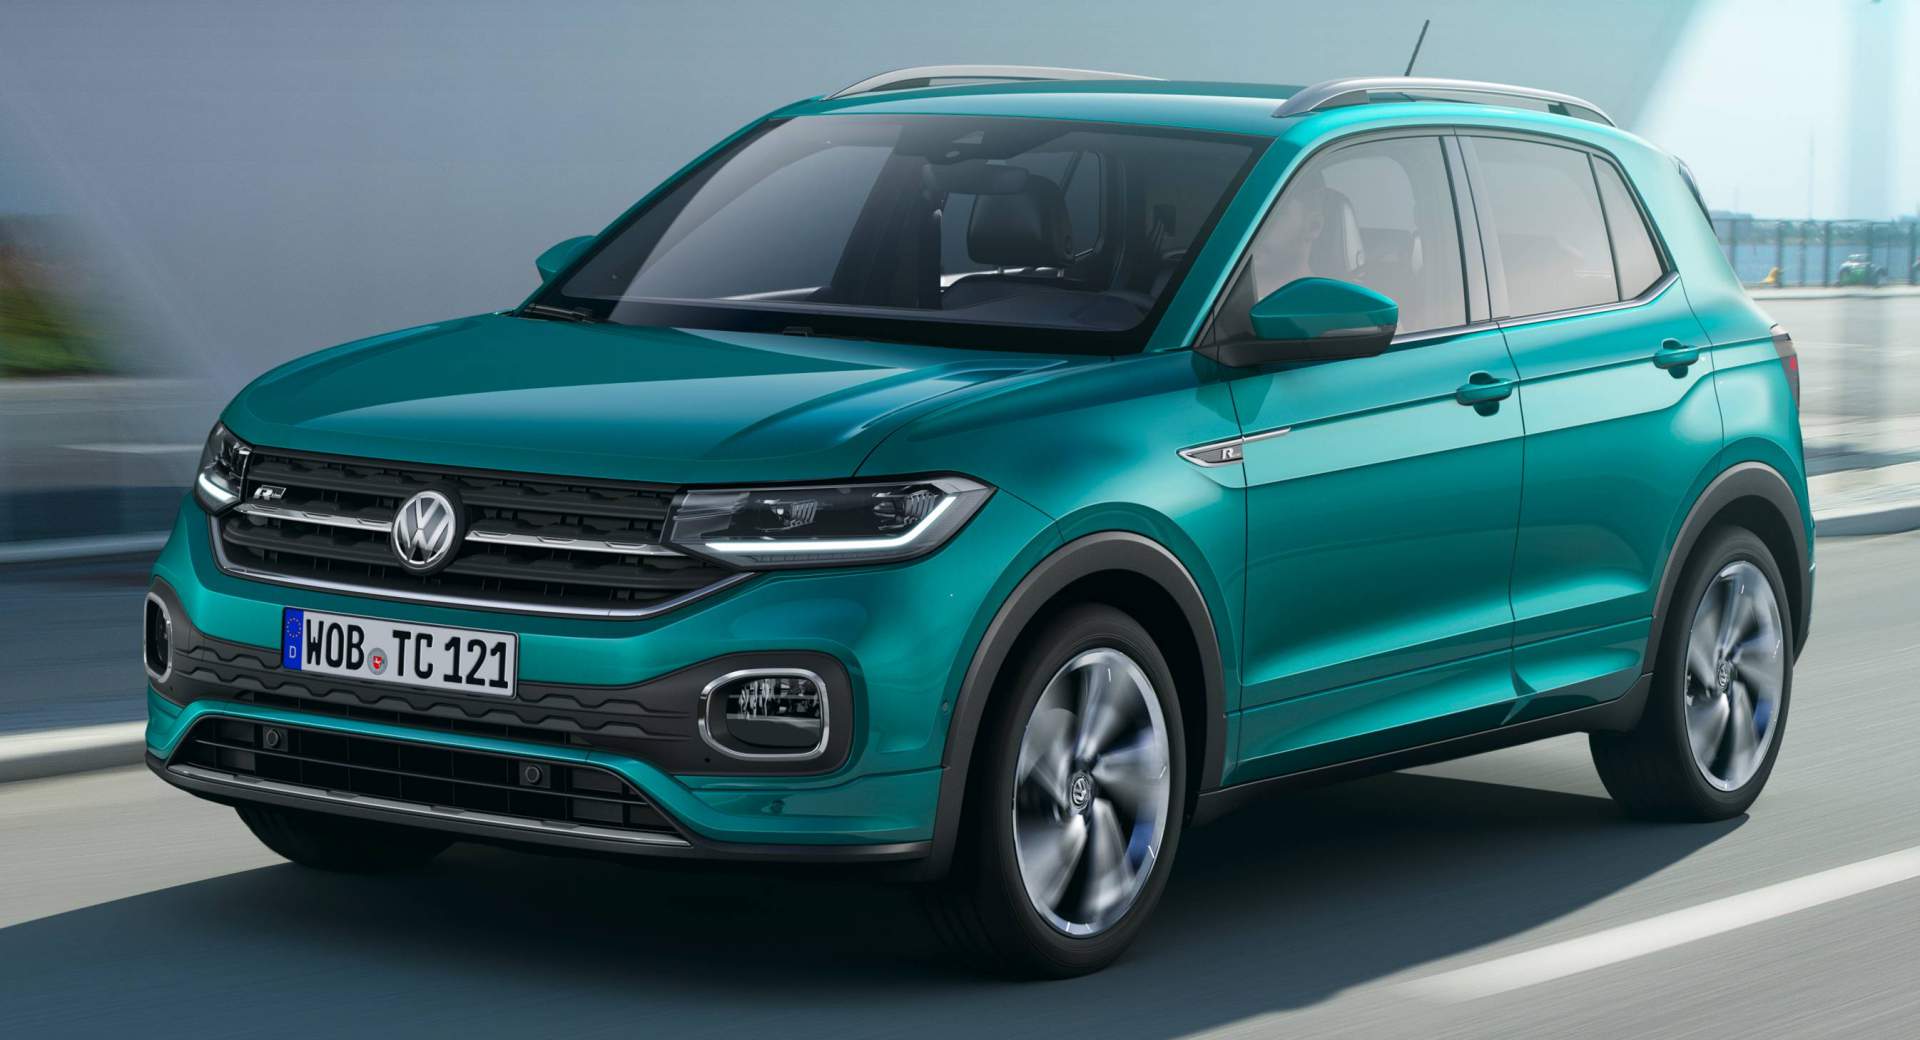 New 2019 TCross Is VW’s Smallest And Cheapest SUV Ever